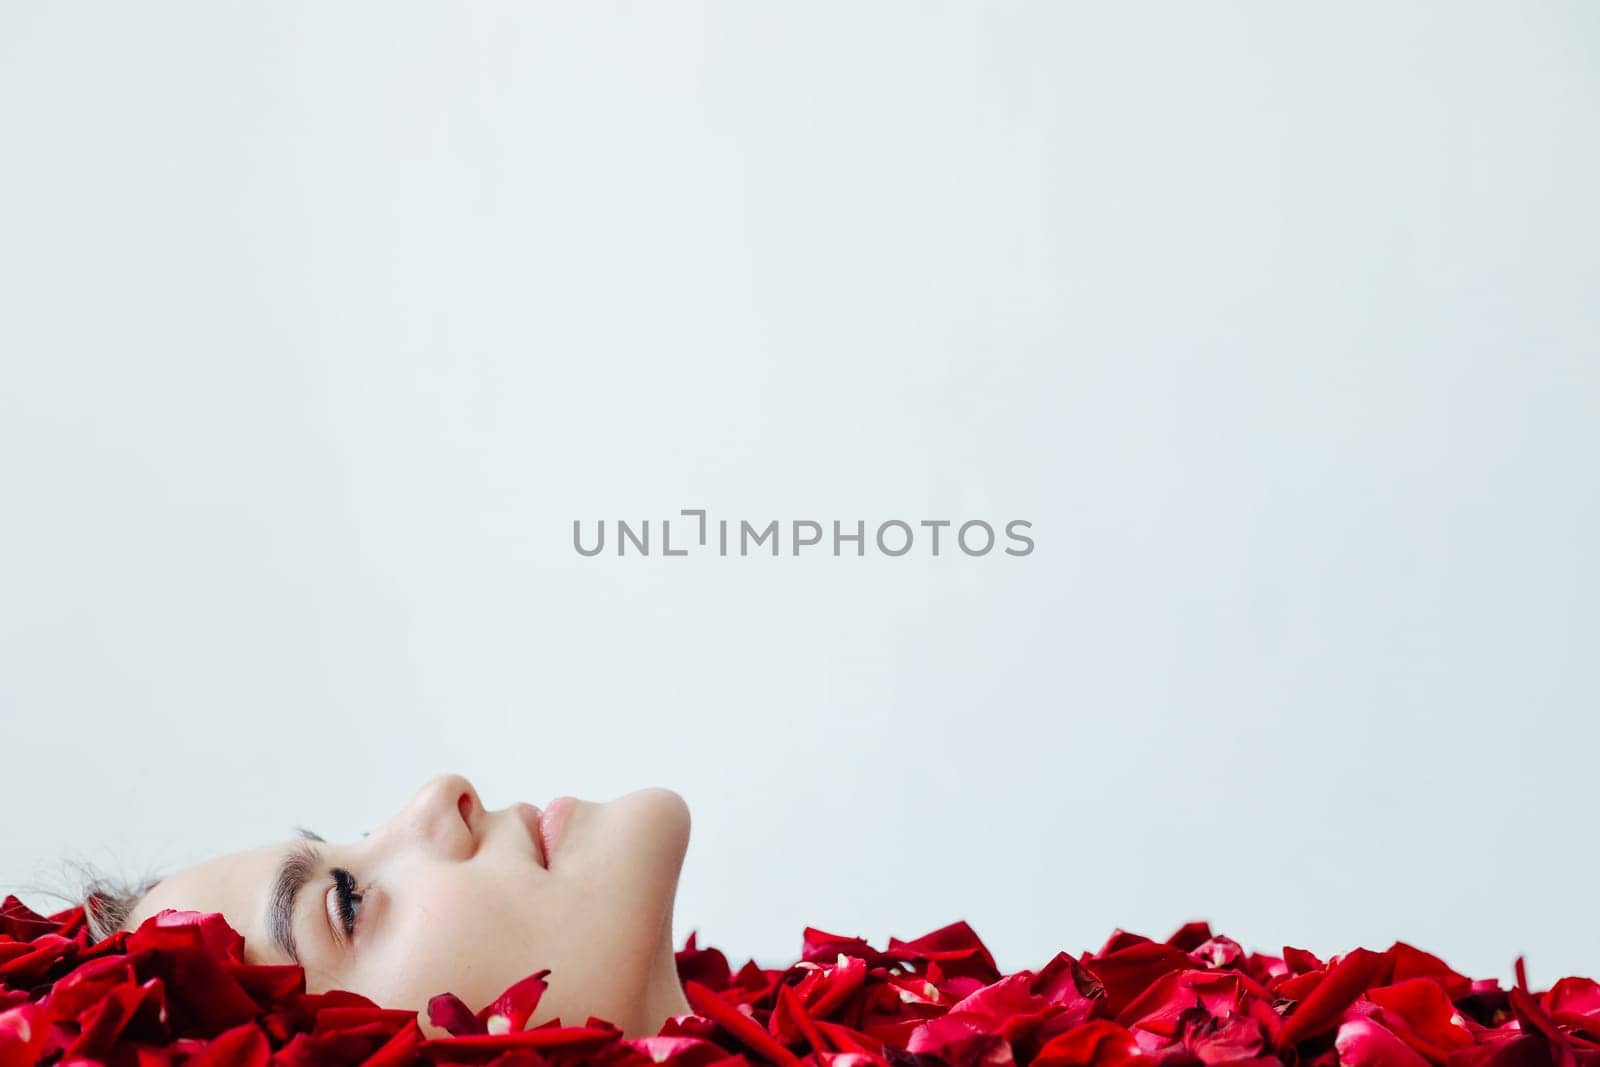 the face of a woman in red rose petals on a light background by Simakov